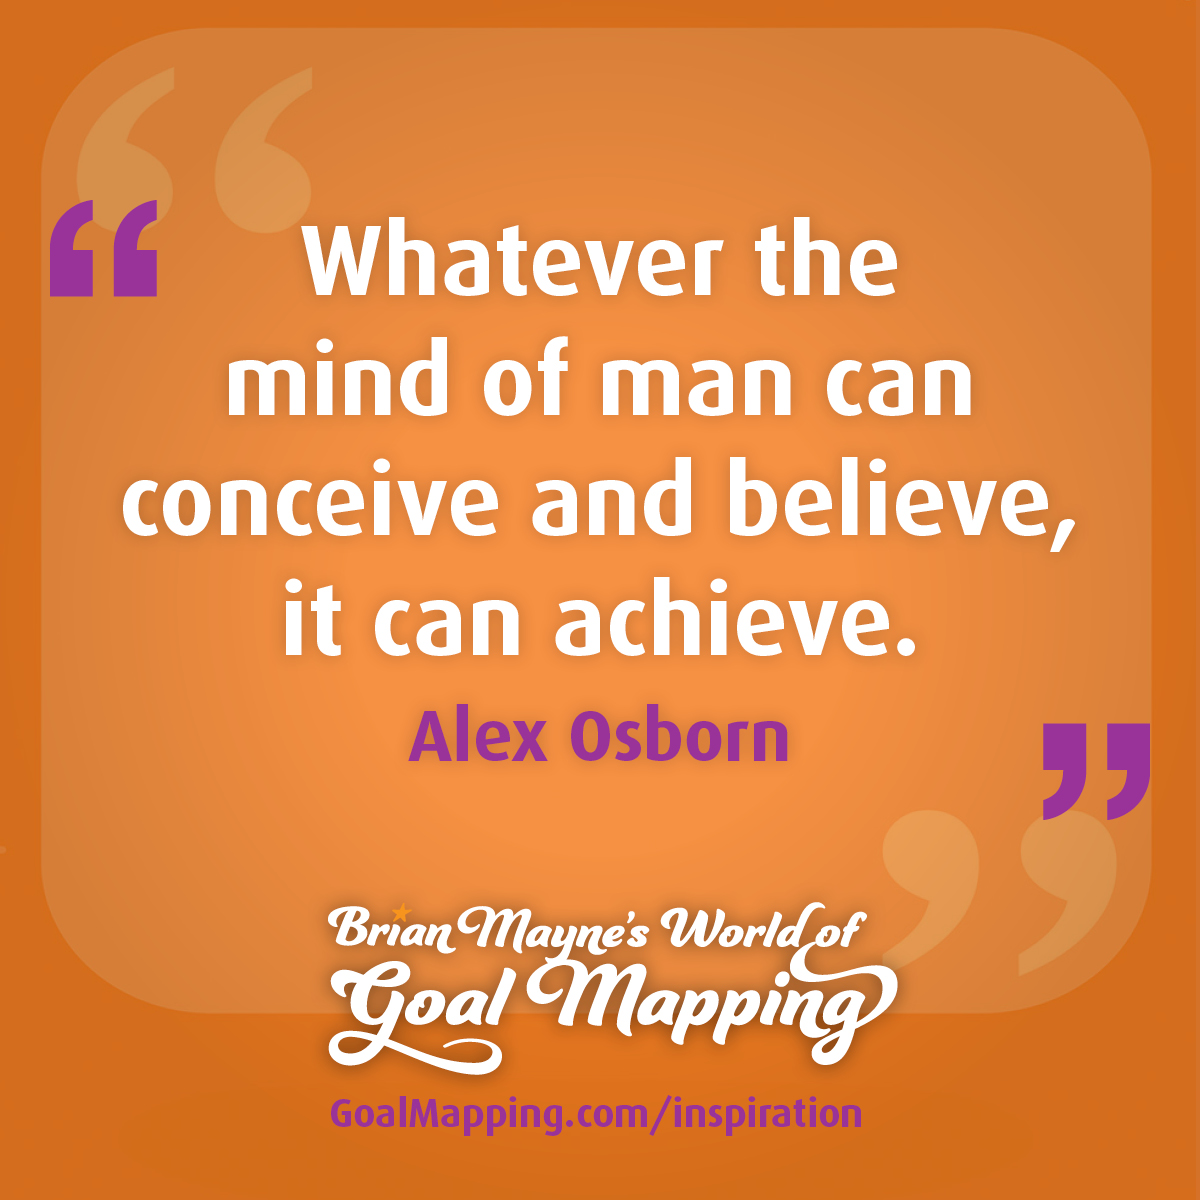 "Whatever the mind of man can conceive and believe, it can achieve." Alex Osborn